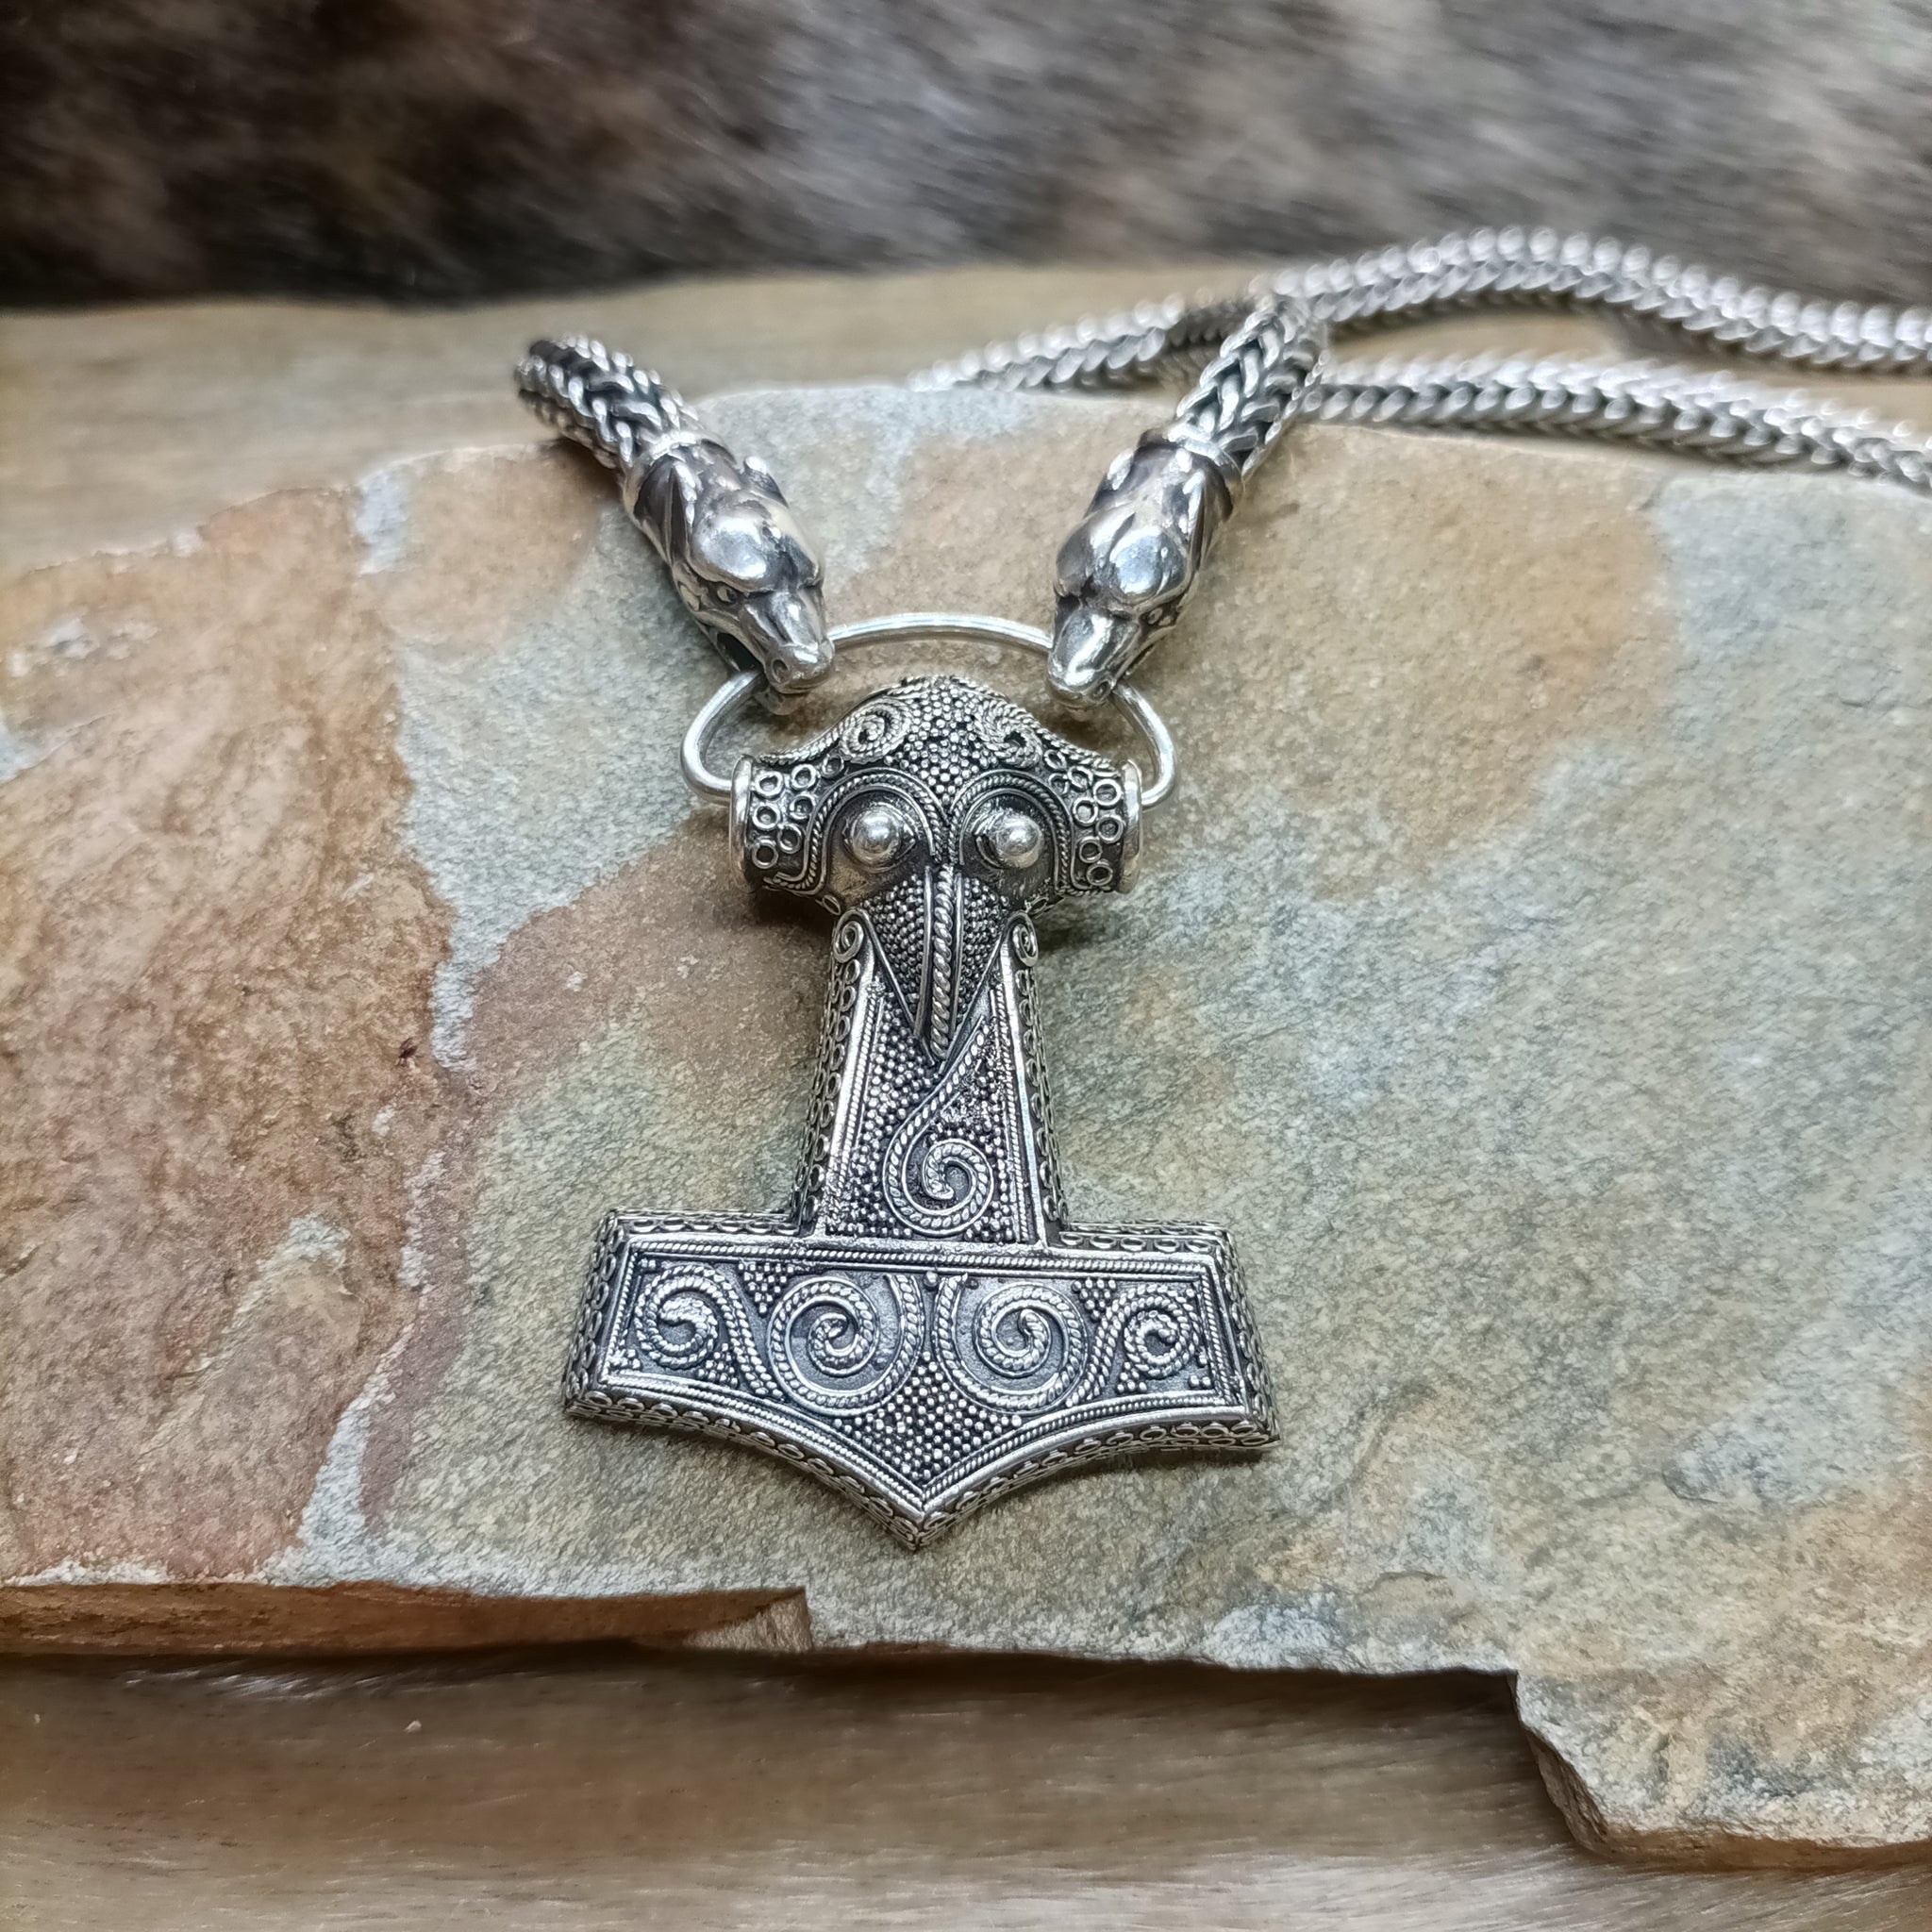 8mm Thick Silver Snake Chain Thors Hammer Necklace with Ferocious Wolf Heads and Large Silver Kabara Thors Hammer on Rock